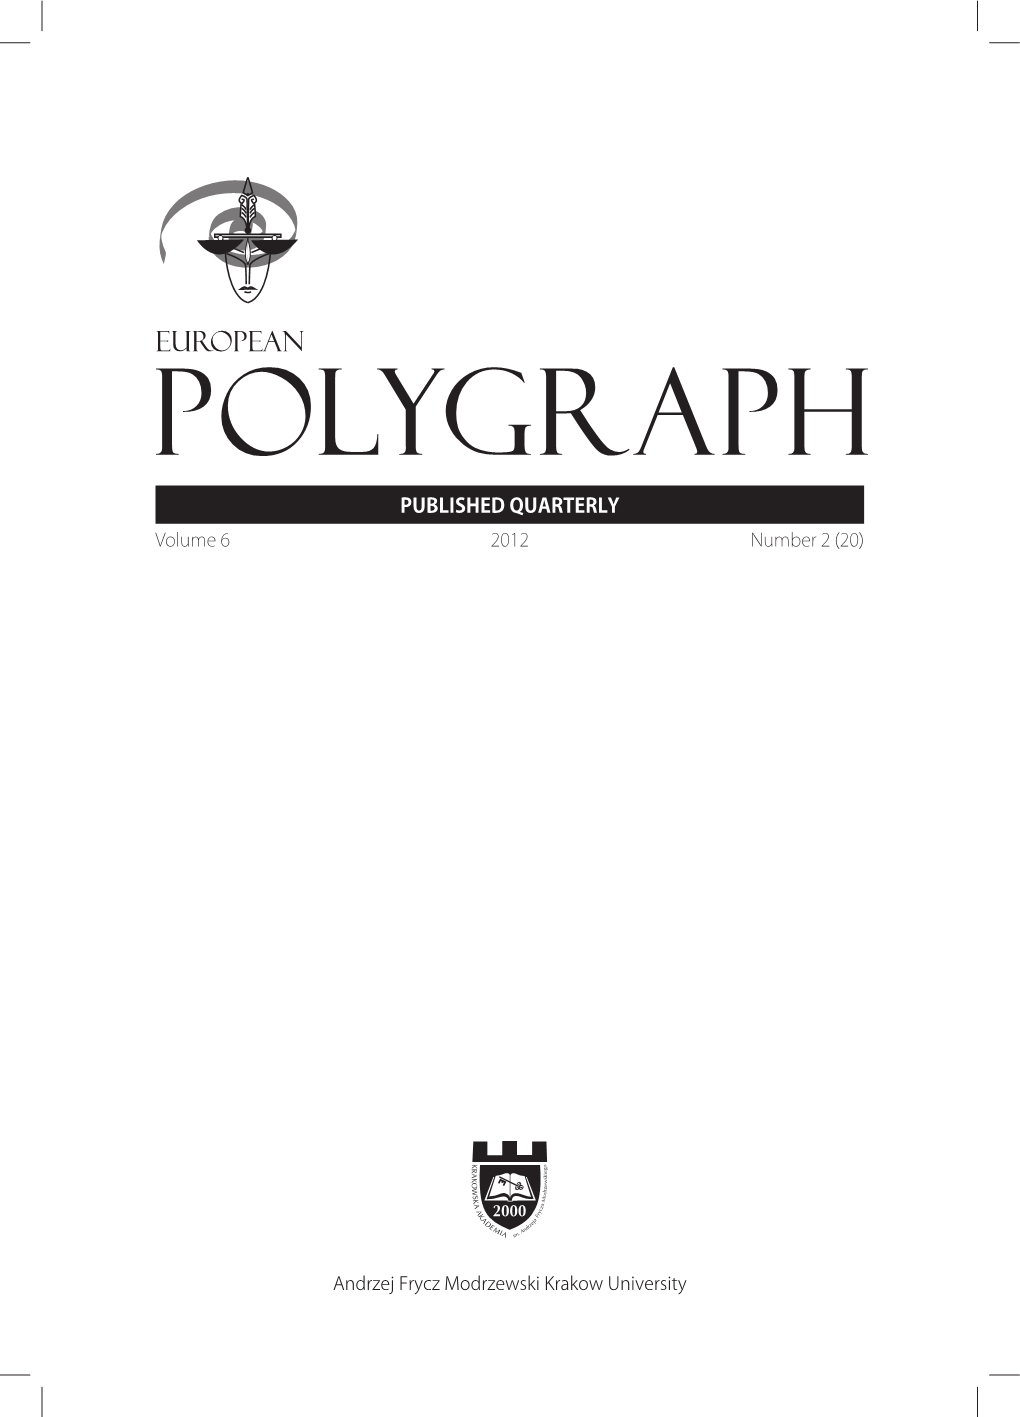 Minimum Number of Polygraph Charts Required to Reach a Conclusion of Truth or Deception in Psychophysiological Veracity Examinations